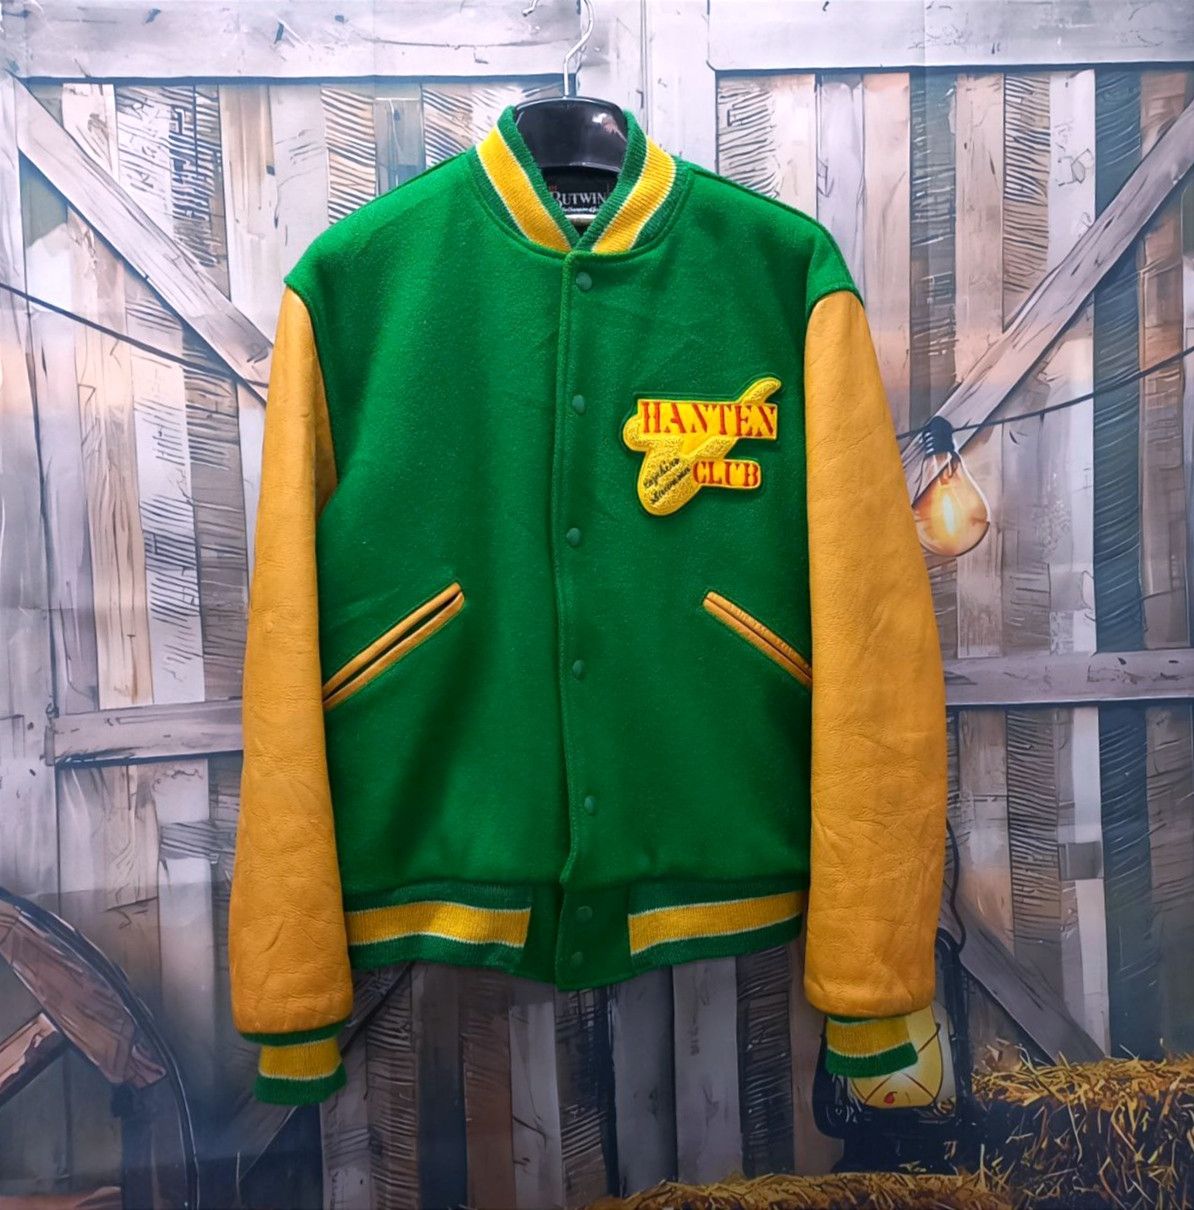 Union Made - HANTEN CLUB 1984 by BUTWIN USA Wool Leather Varsity Jacket - 2